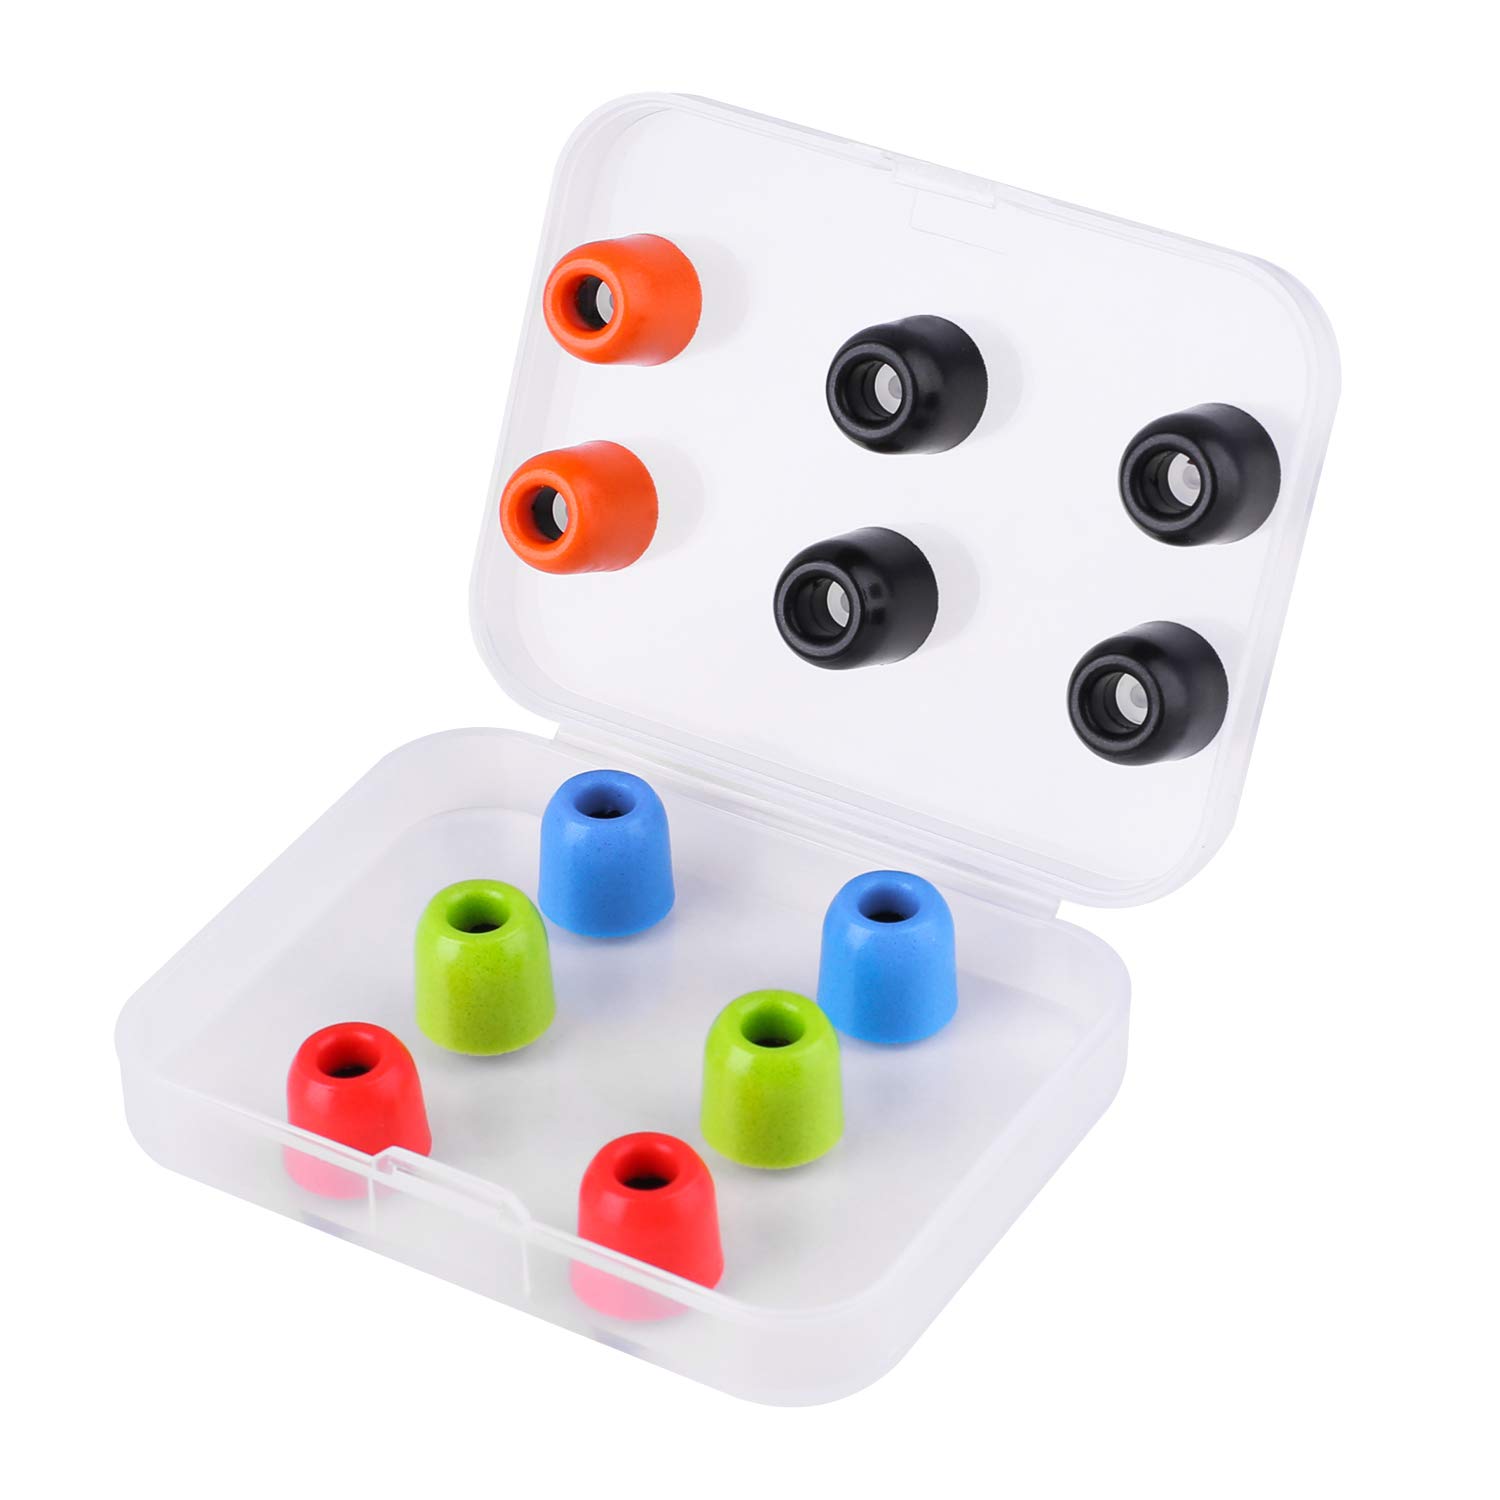 LUDOS Comfy Earbuds Replacement Memory Foam Ear Tips for Ear Buds and Earphones, with Color Red Green Orange Blue Eartips, Washa